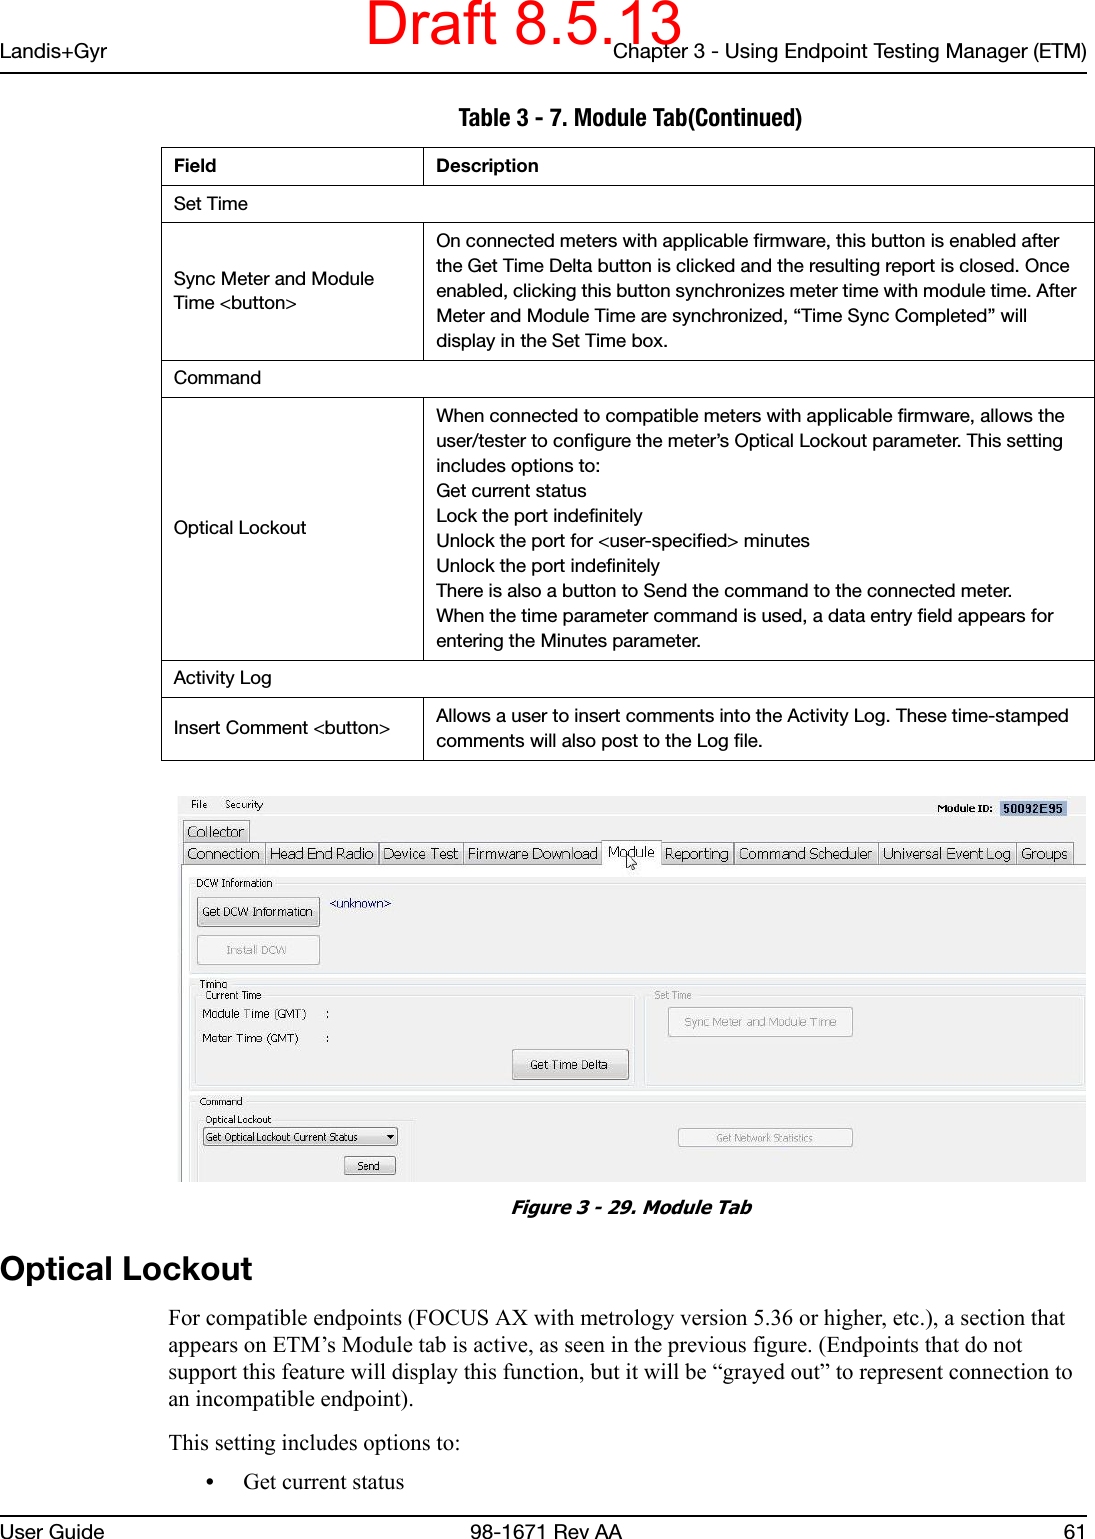 Landis+Gyr Chapter 3 - Using Endpoint Testing Manager (ETM)User Guide  98-1671 Rev AA 61 Figure 3 - 29. Module TabOptical LockoutFor compatible endpoints (FOCUS AX with metrology version 5.36 or higher, etc.), a section that appears on ETM’s Module tab is active, as seen in the previous figure. (Endpoints that do not support this feature will display this function, but it will be “grayed out” to represent connection to an incompatible endpoint).This setting includes options to:•Get current statusSet TimeSync Meter and Module Time &lt;button&gt;On connected meters with applicable firmware, this button is enabled after the Get Time Delta button is clicked and the resulting report is closed. Once enabled, clicking this button synchronizes meter time with module time. After Meter and Module Time are synchronized, “Time Sync Completed” will display in the Set Time box.CommandOptical LockoutWhen connected to compatible meters with applicable firmware, allows the user/tester to configure the meter’s Optical Lockout parameter. This setting includes options to:Get current statusLock the port indefinitelyUnlock the port for &lt;user-specified&gt; minutesUnlock the port indefinitelyThere is also a button to Send the command to the connected meter. When the time parameter command is used, a data entry field appears for entering the Minutes parameter.Activity LogInsert Comment &lt;button&gt; Allows a user to insert comments into the Activity Log. These time-stamped comments will also post to the Log file. Table 3 - 7. Module Tab(Continued)Field DescriptionDraft 8.5.13